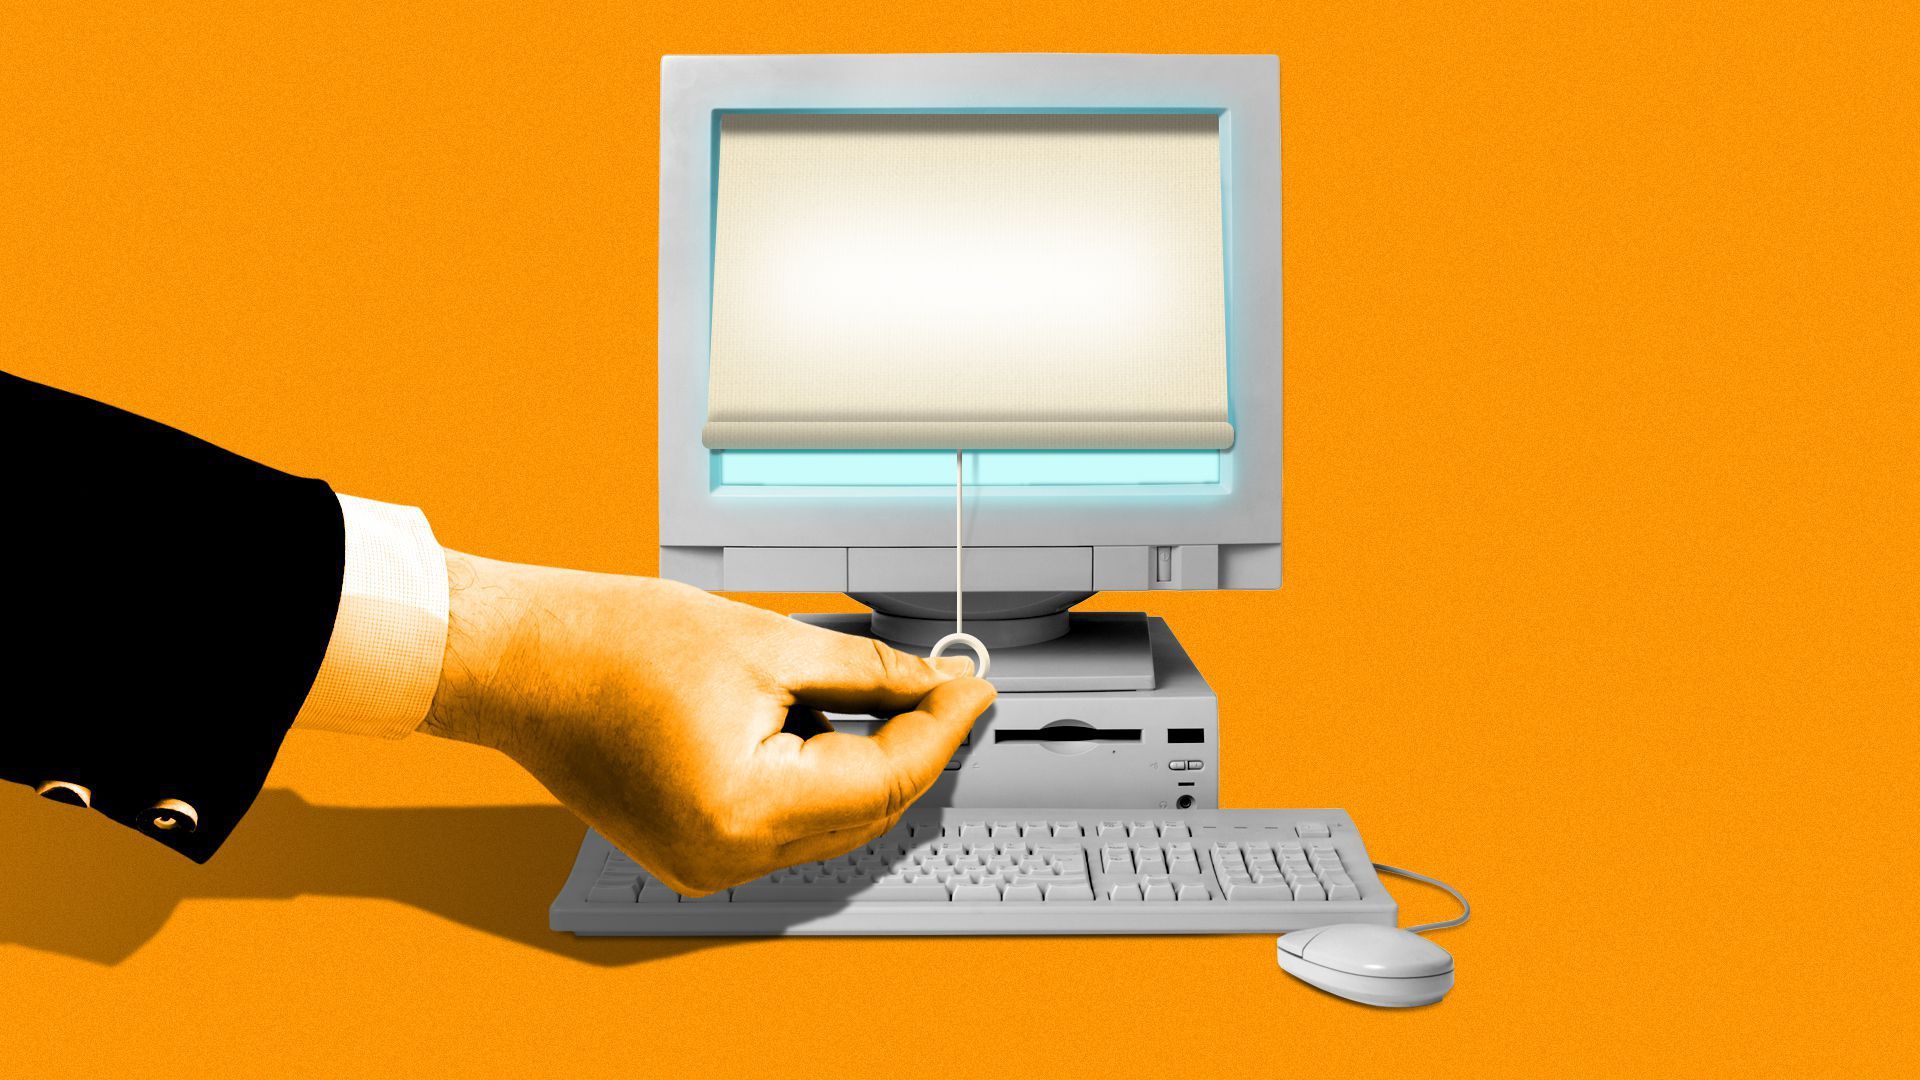 Illustration of a hand pulling a screen over a computer.